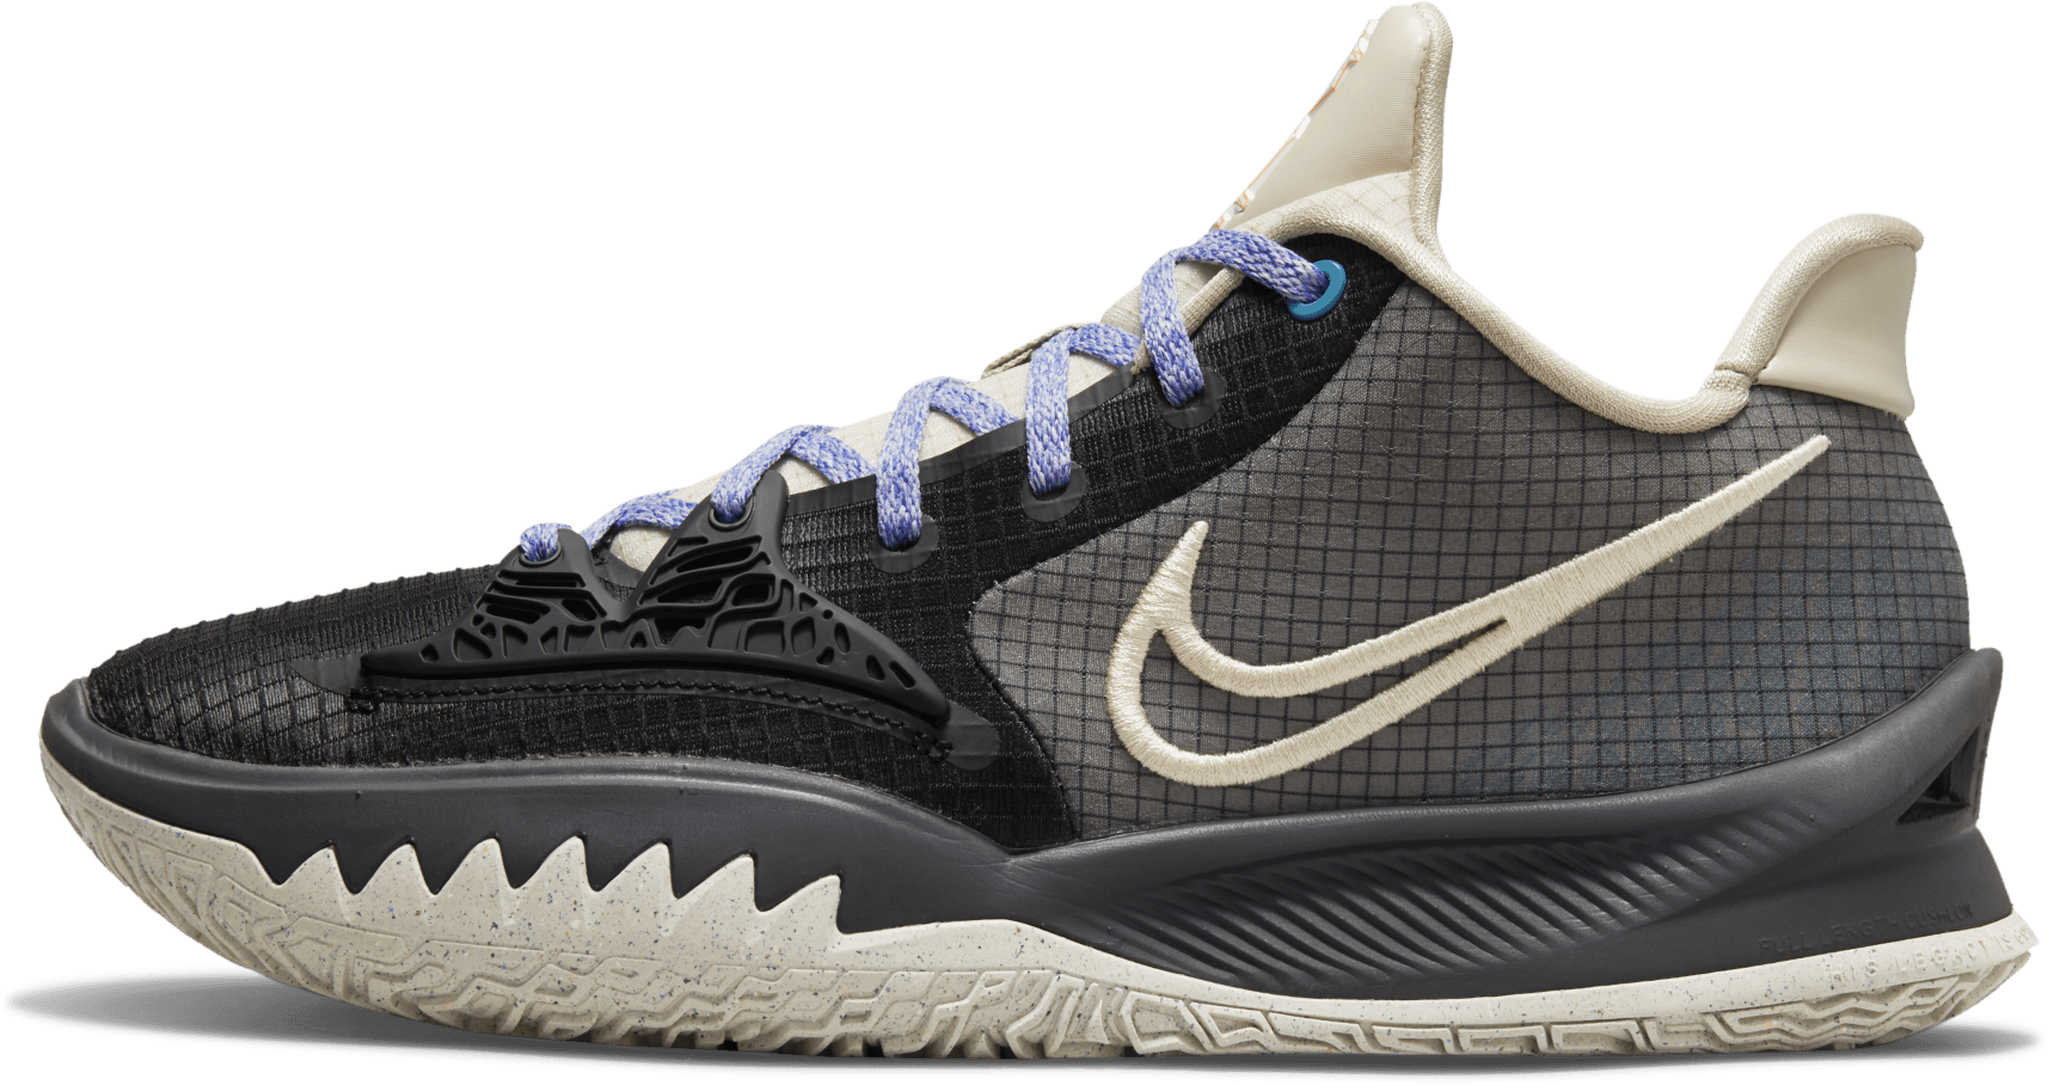 Nike Kyrie Low 4 Colorways - 16 Styles Starting from $109.99